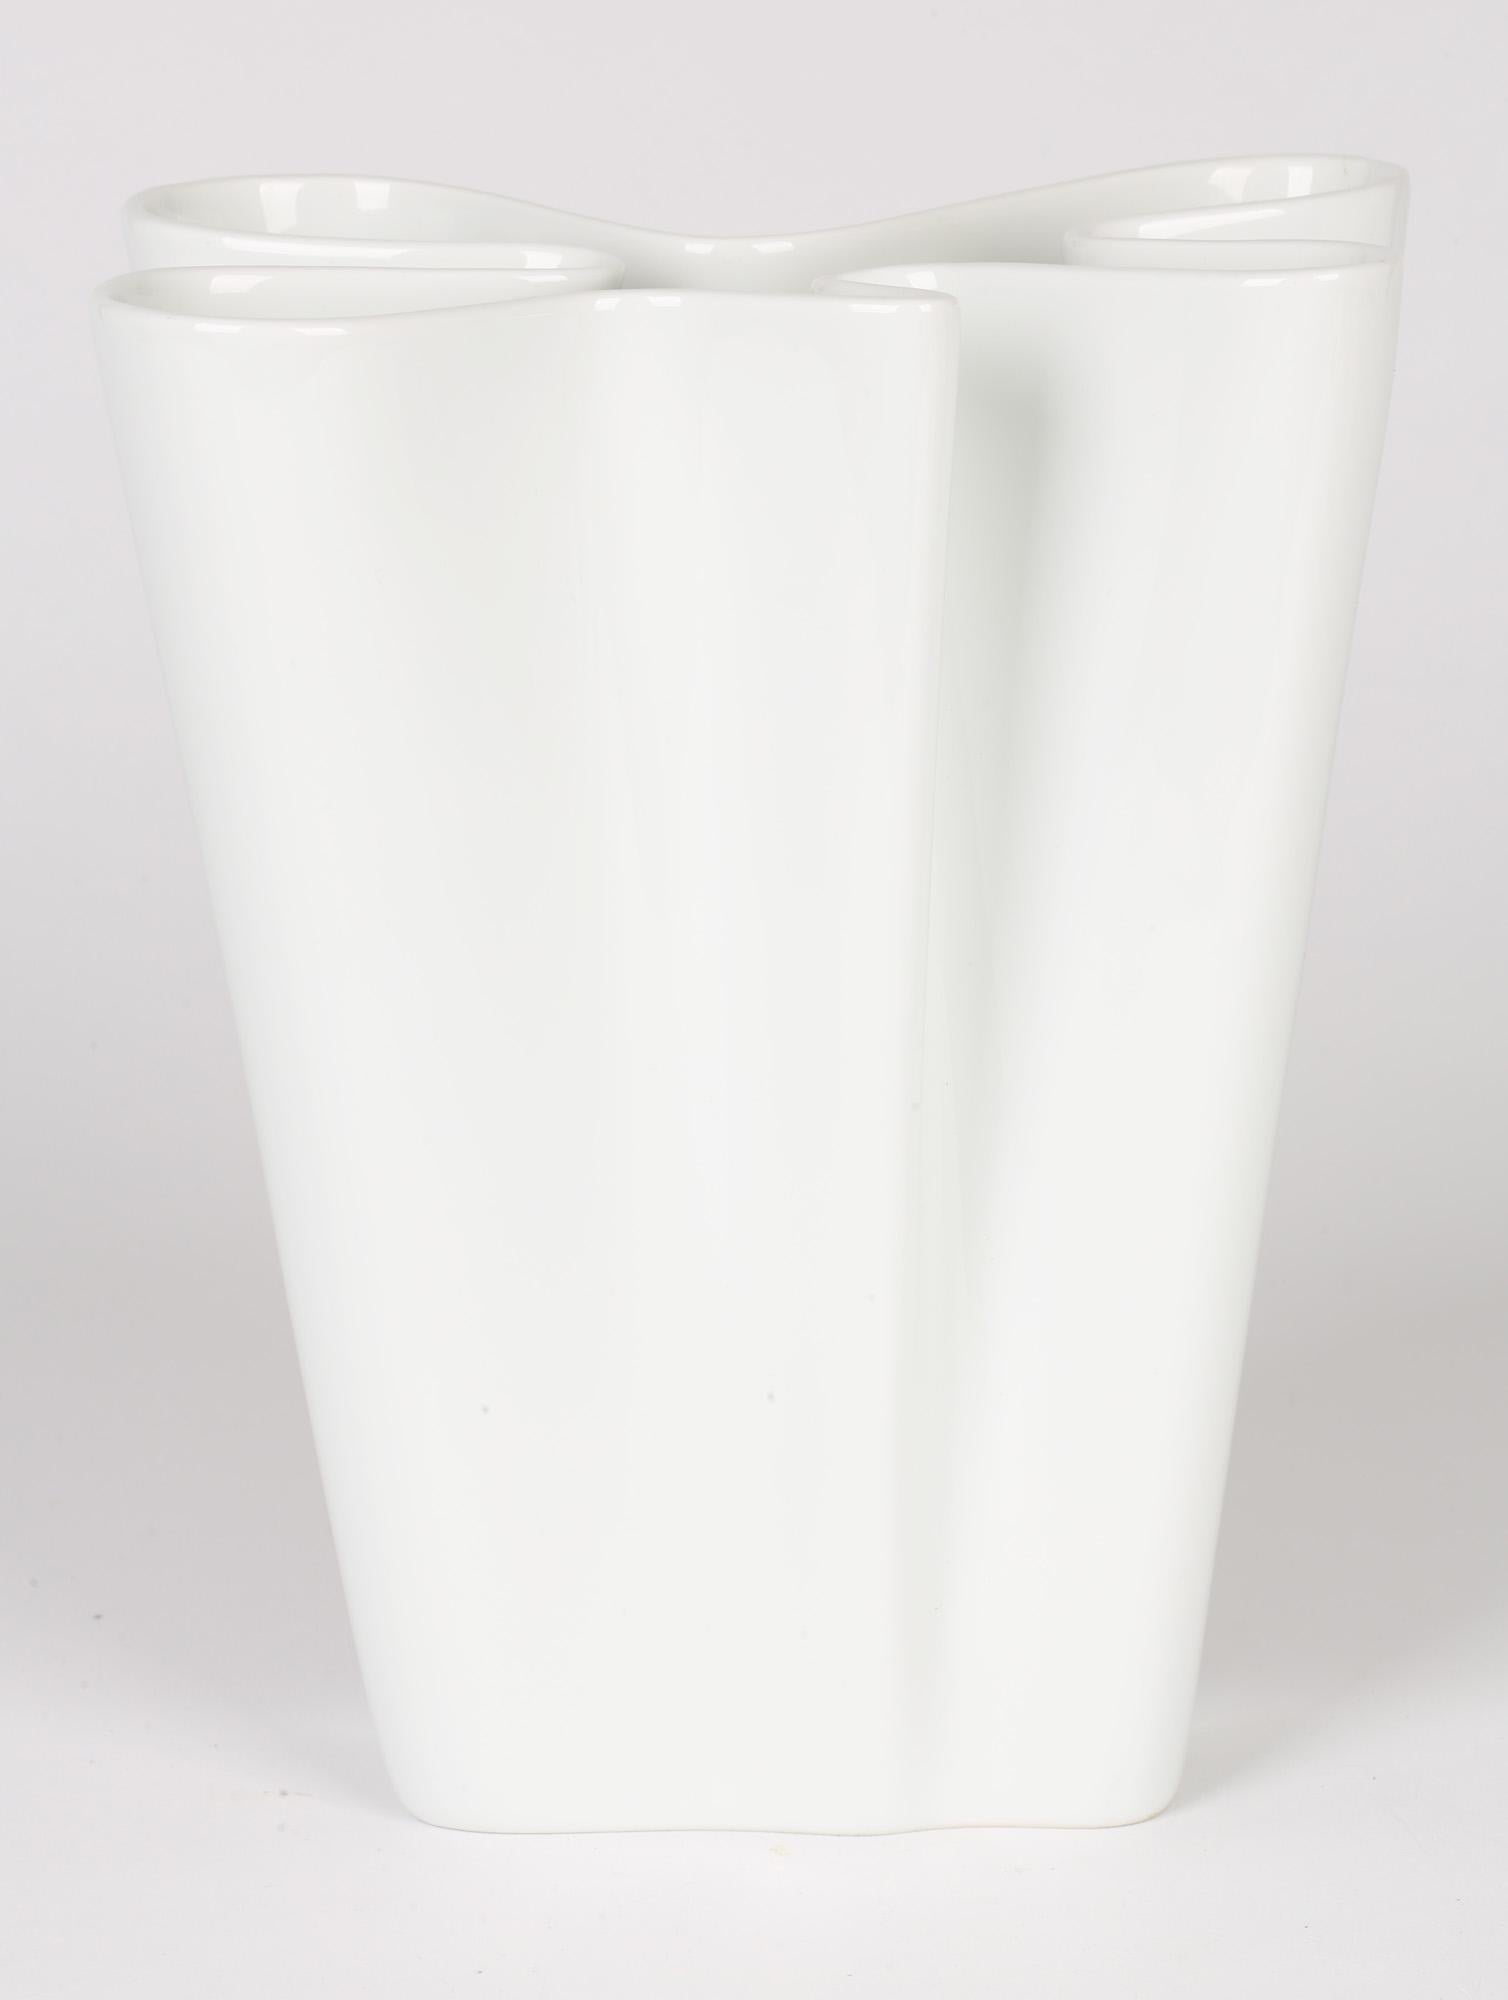 A stylish German porcelain folded paper style vase from the Studio-Line Flux range by Rosenthal and dating from the latter 20th century. The vase stands on an irregular rectangular shaped base and the body is constructed from a series of folded and